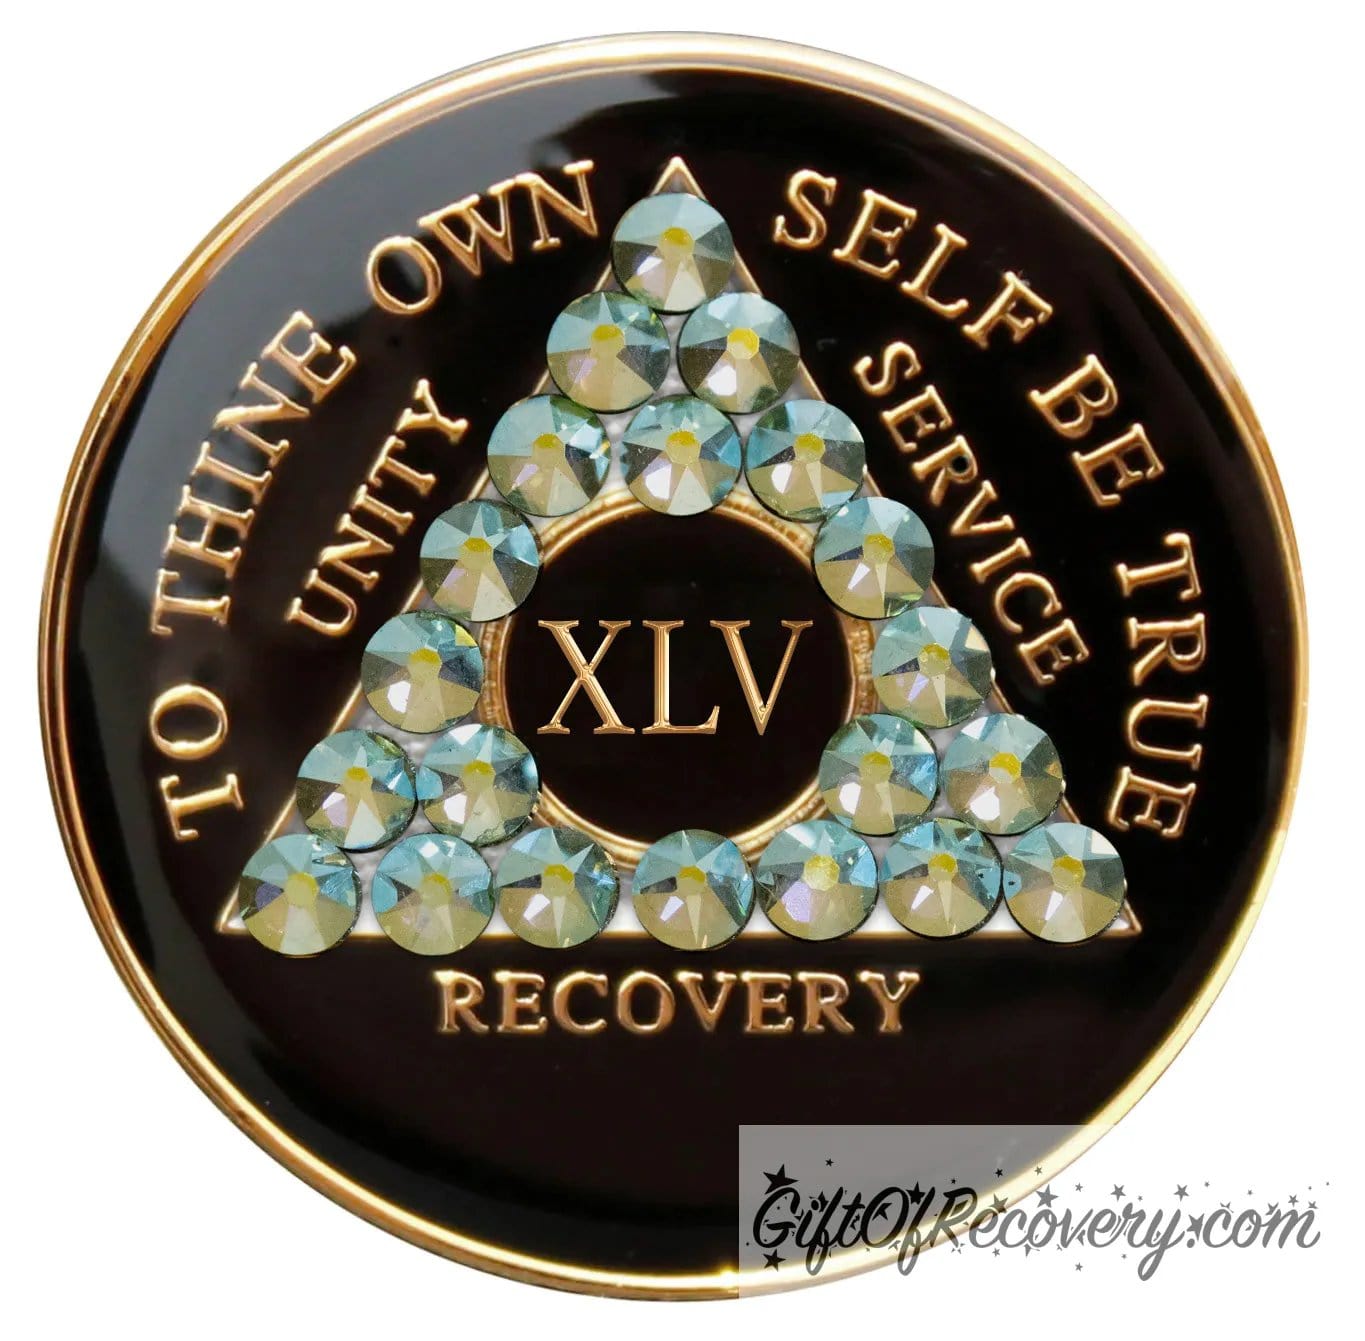 45 year AA medallion Black onyx, with 21 genuine Peridot AB crystals in the shape of the triangle, to thine own self be true, unity, service, recovery, and the roman numeral, are embossed with 14k gold-plated brass, the recovery medallion is sealed with resin for a glossy finish that lasts and is scratch proof.